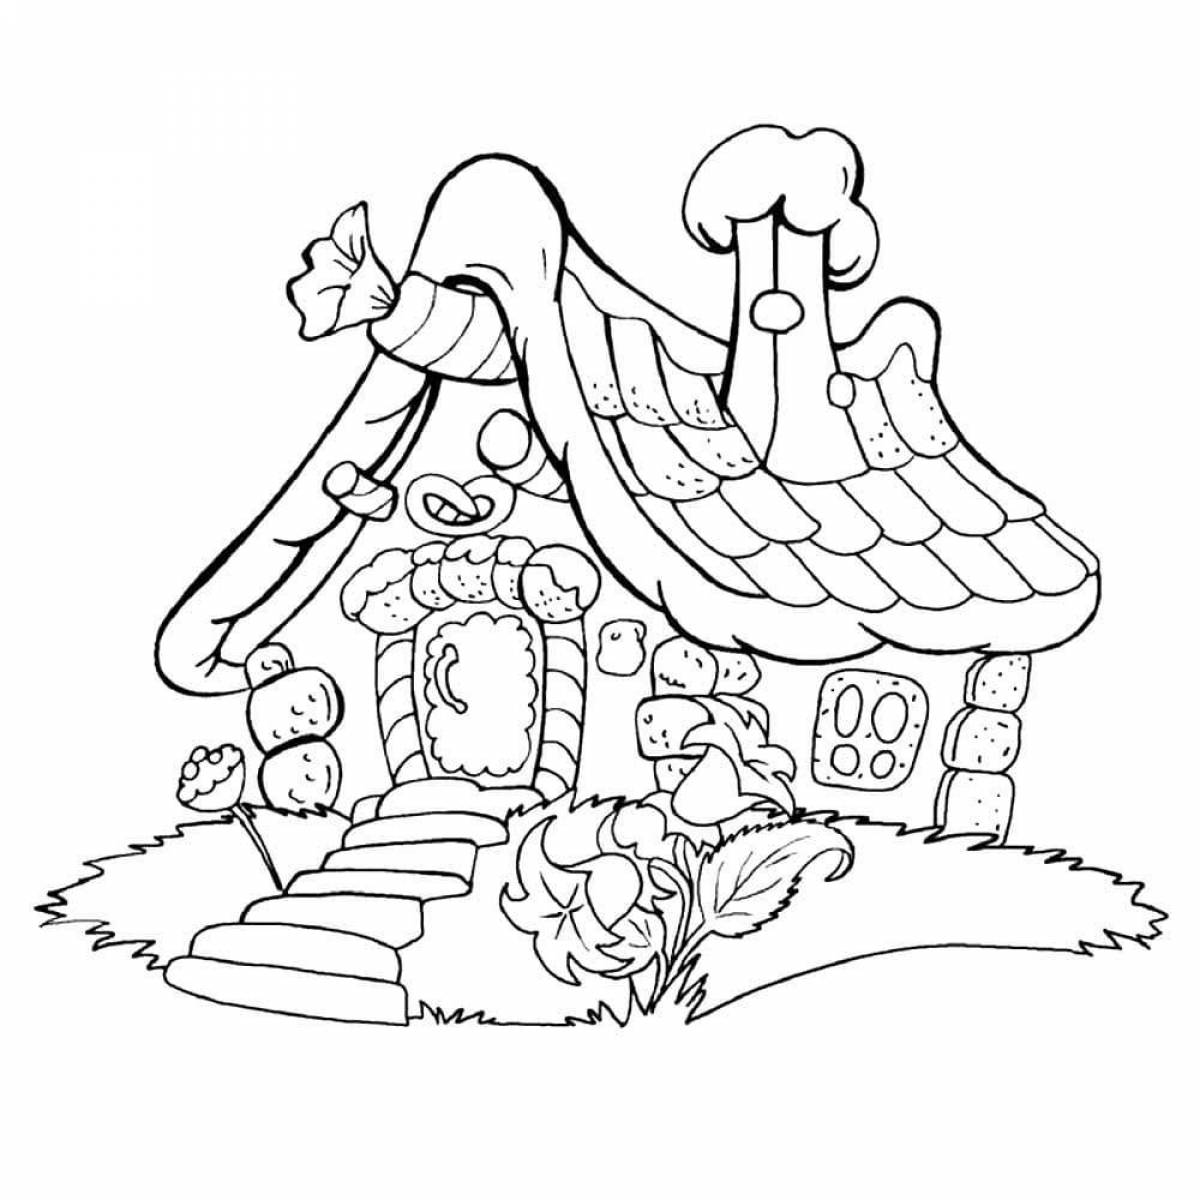 Coloring page dazzling gingerbread house